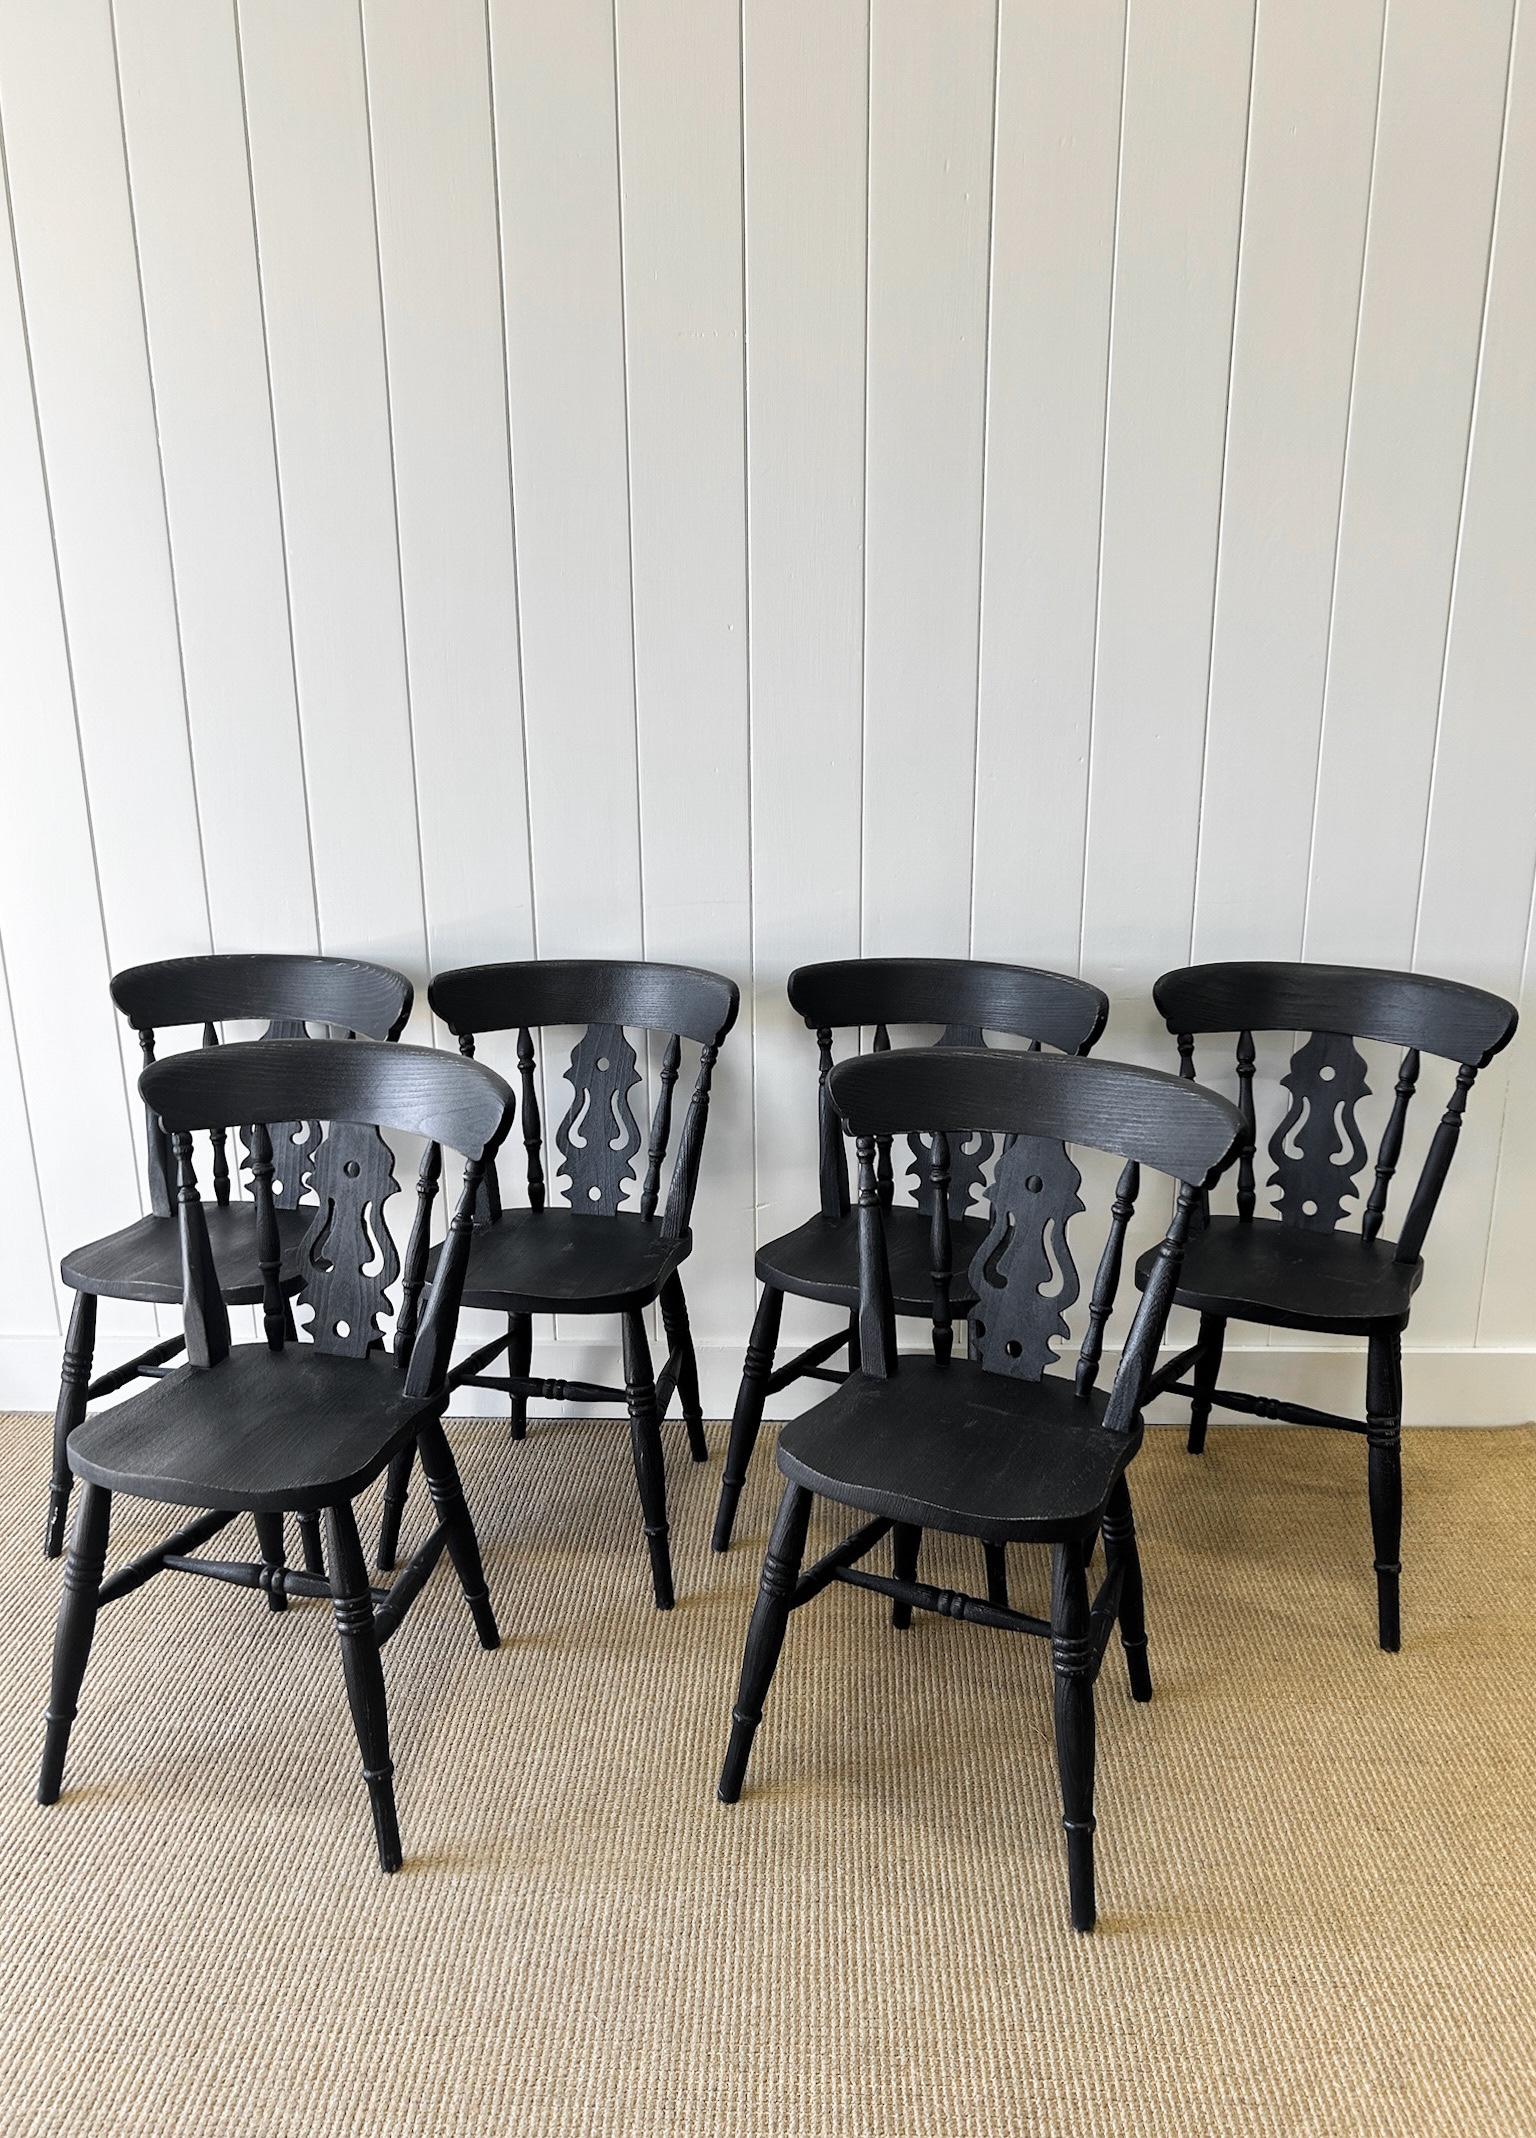 A good set of 6 vintage fiddle back side chairs. Fresh coat of black paint. Very solidly built in the traditional way.  Handsome profiles and good and heavy. Perfect around a farmhouse table! Solid in joint. These are not antiques.

Condition: